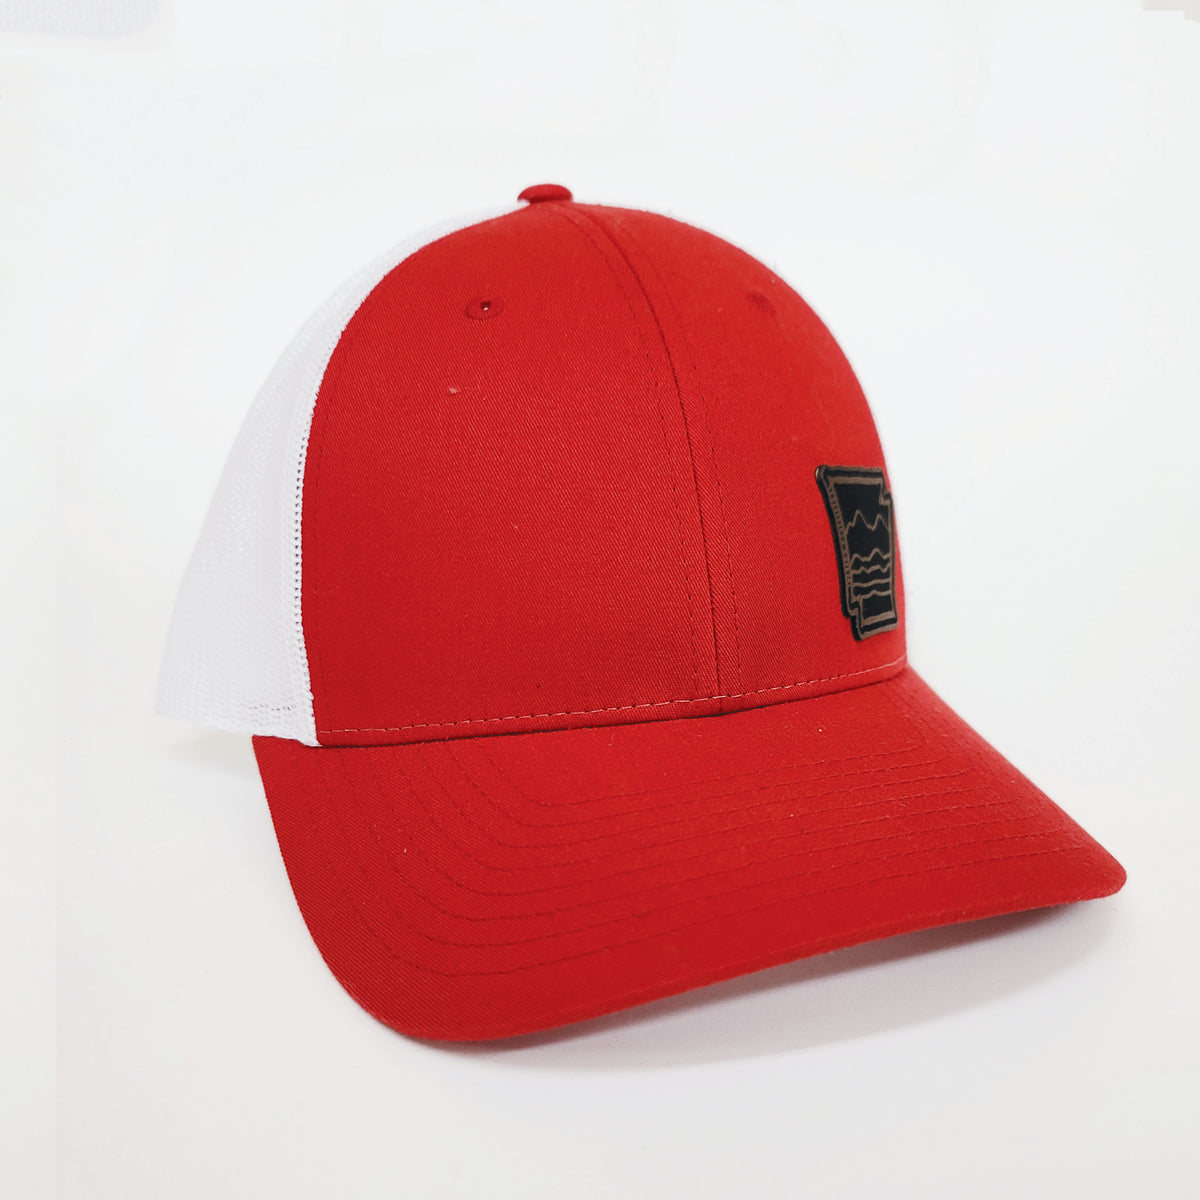 Stated Outfitters Small AR Patch Red/White Hat